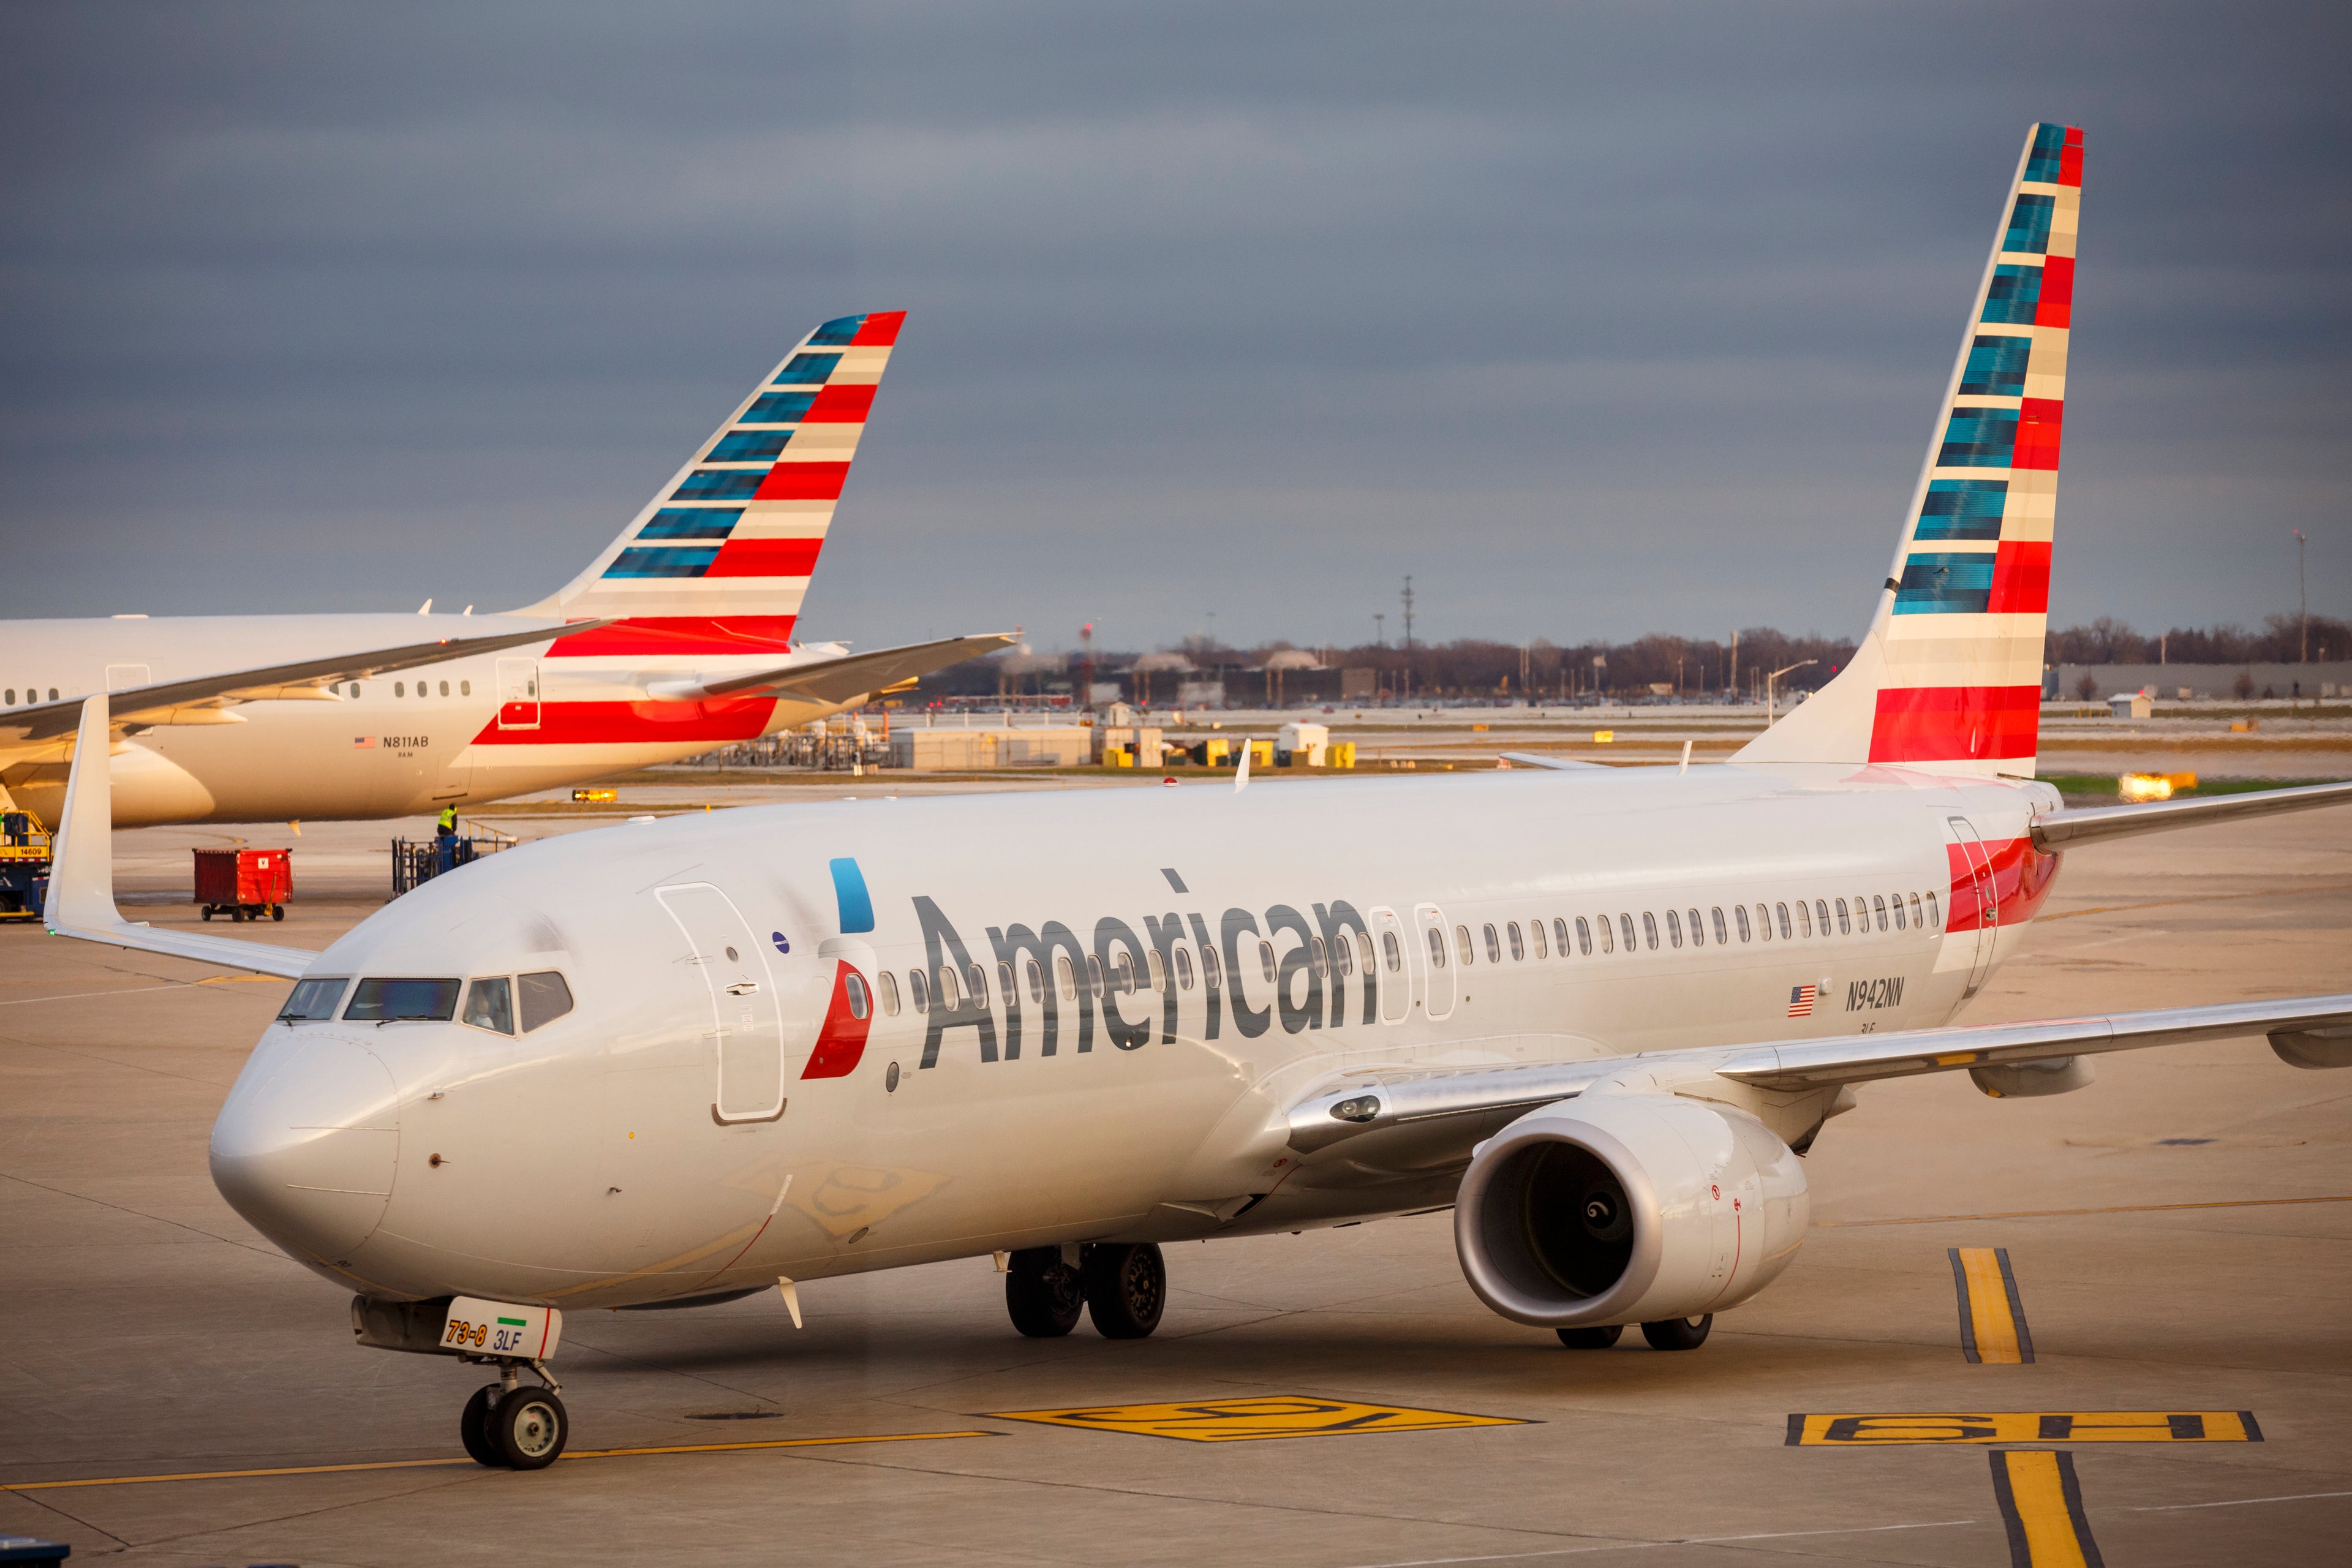 American Airlines Planes at O'Hare